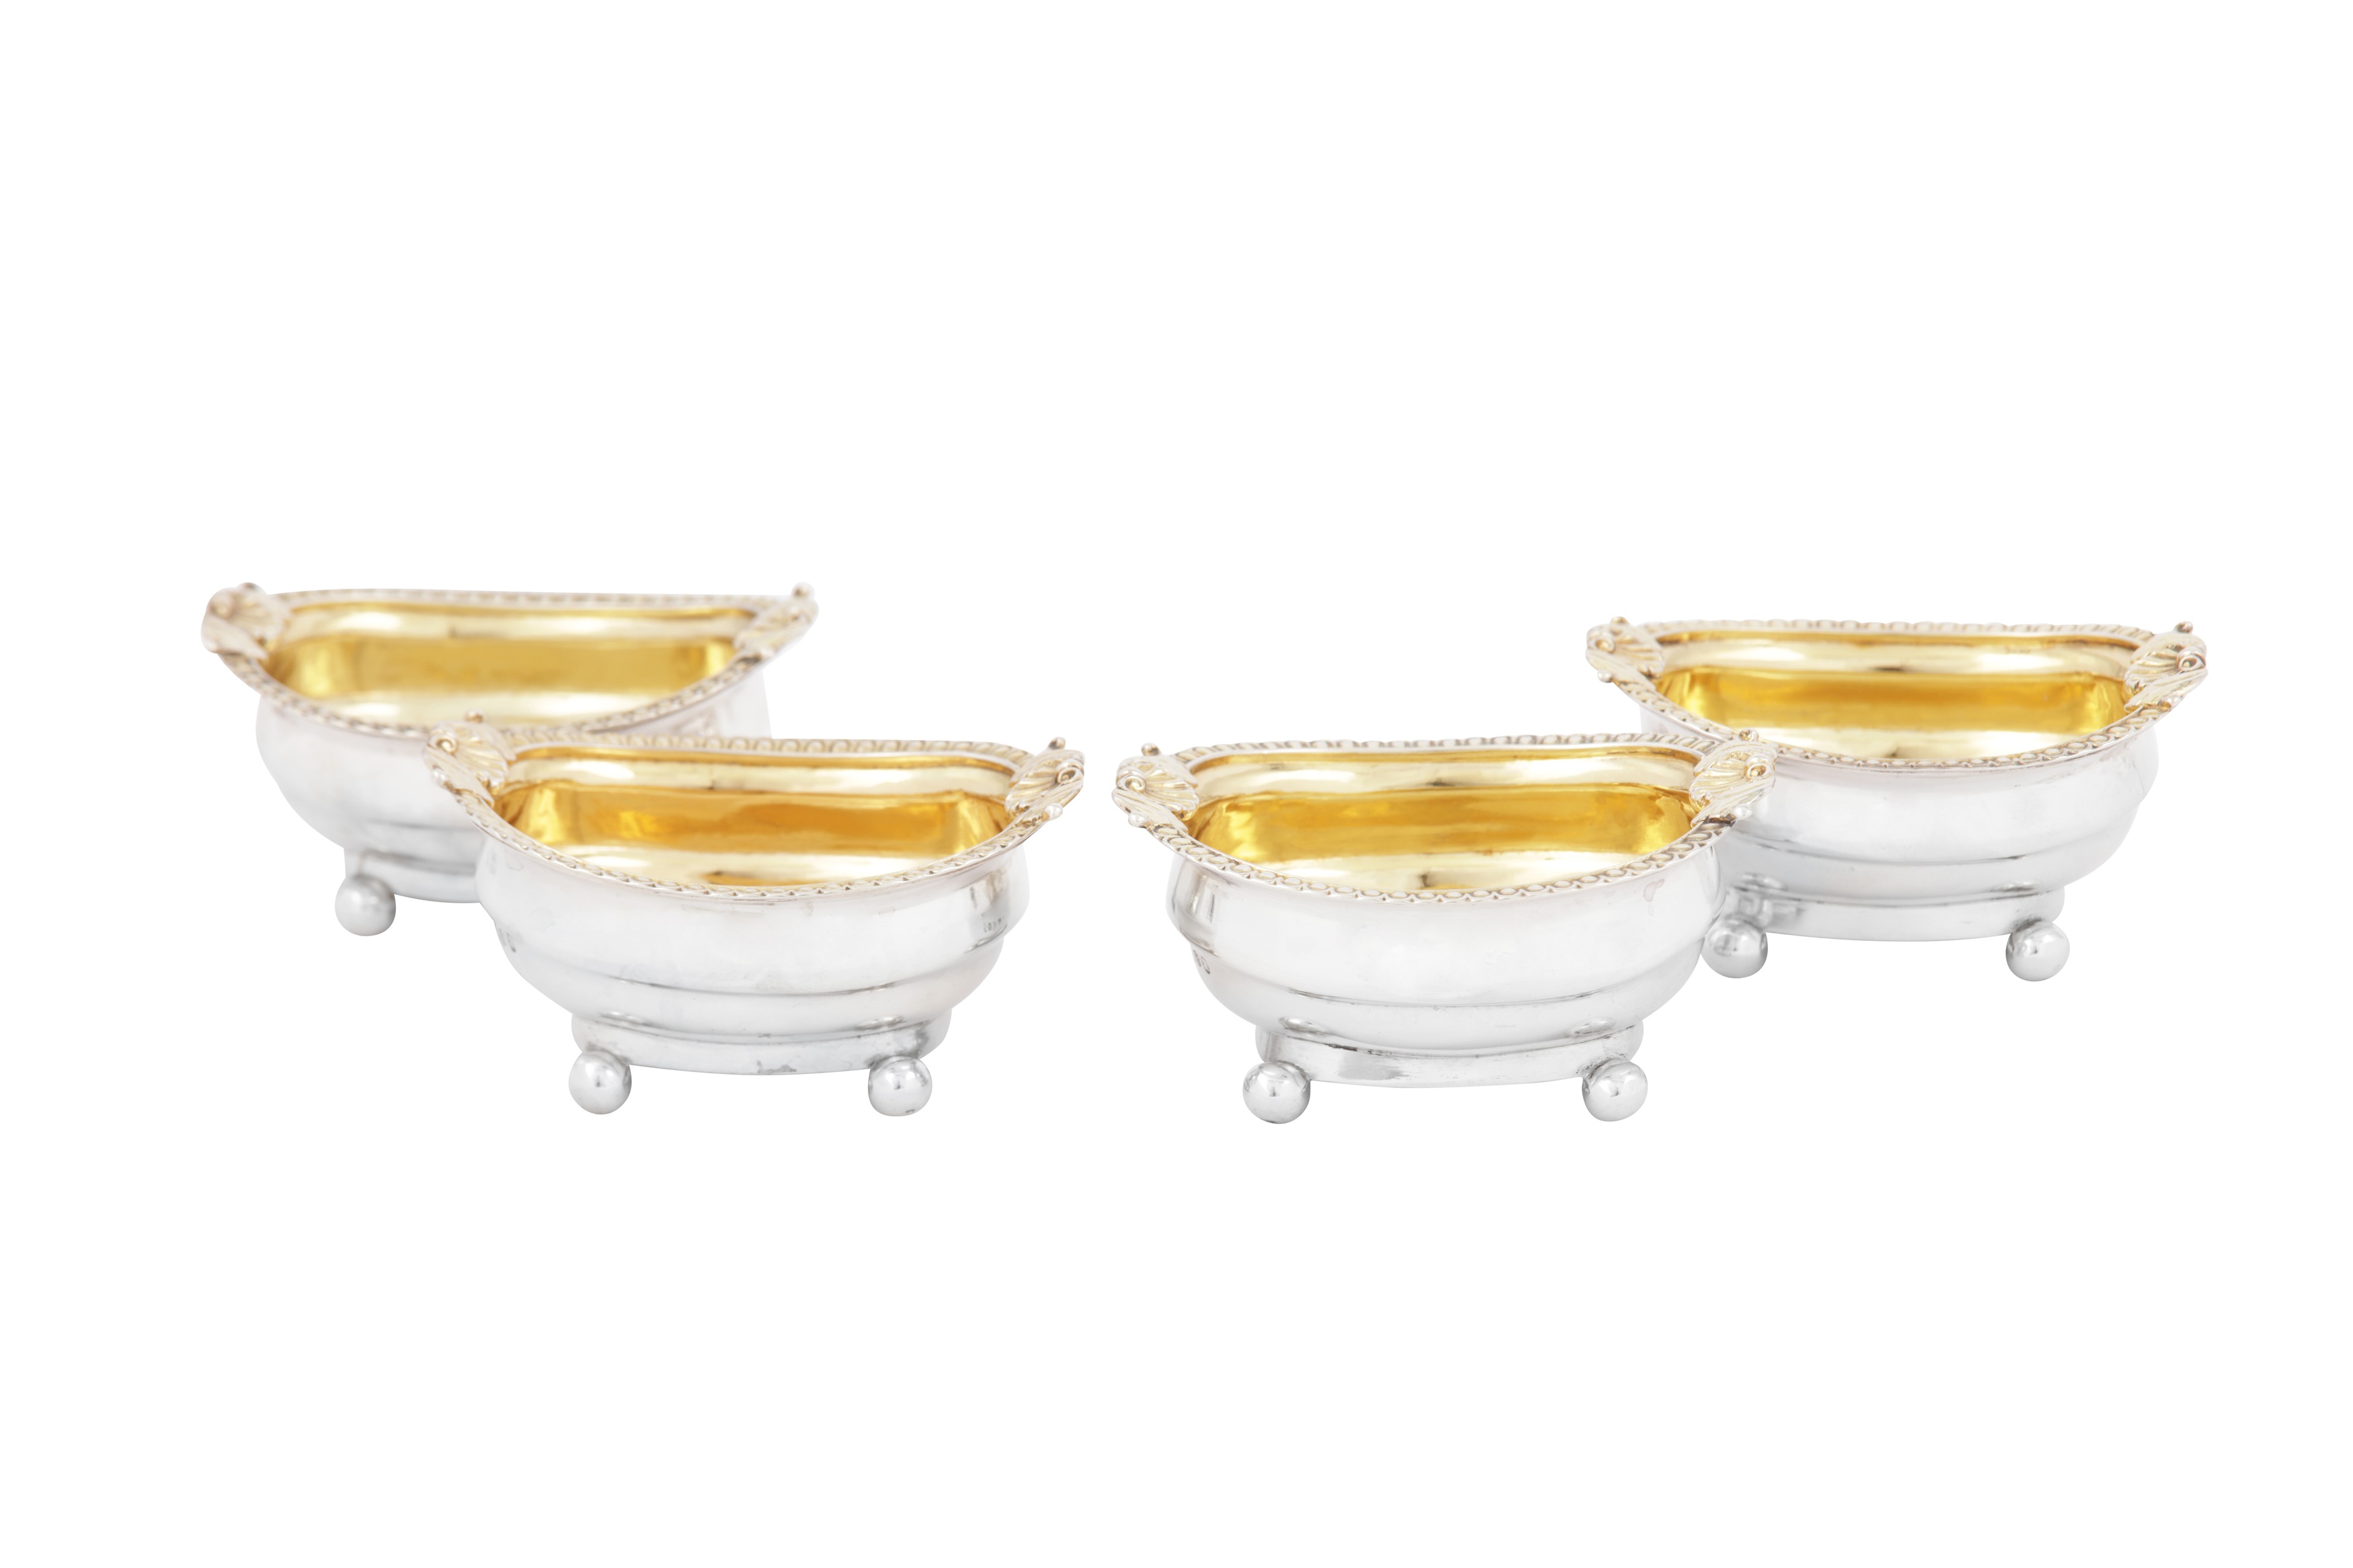 A set of four George III sterling silver salts, London 1810 by Thomas Wallis II and Jonathan Hayne - Image 2 of 6